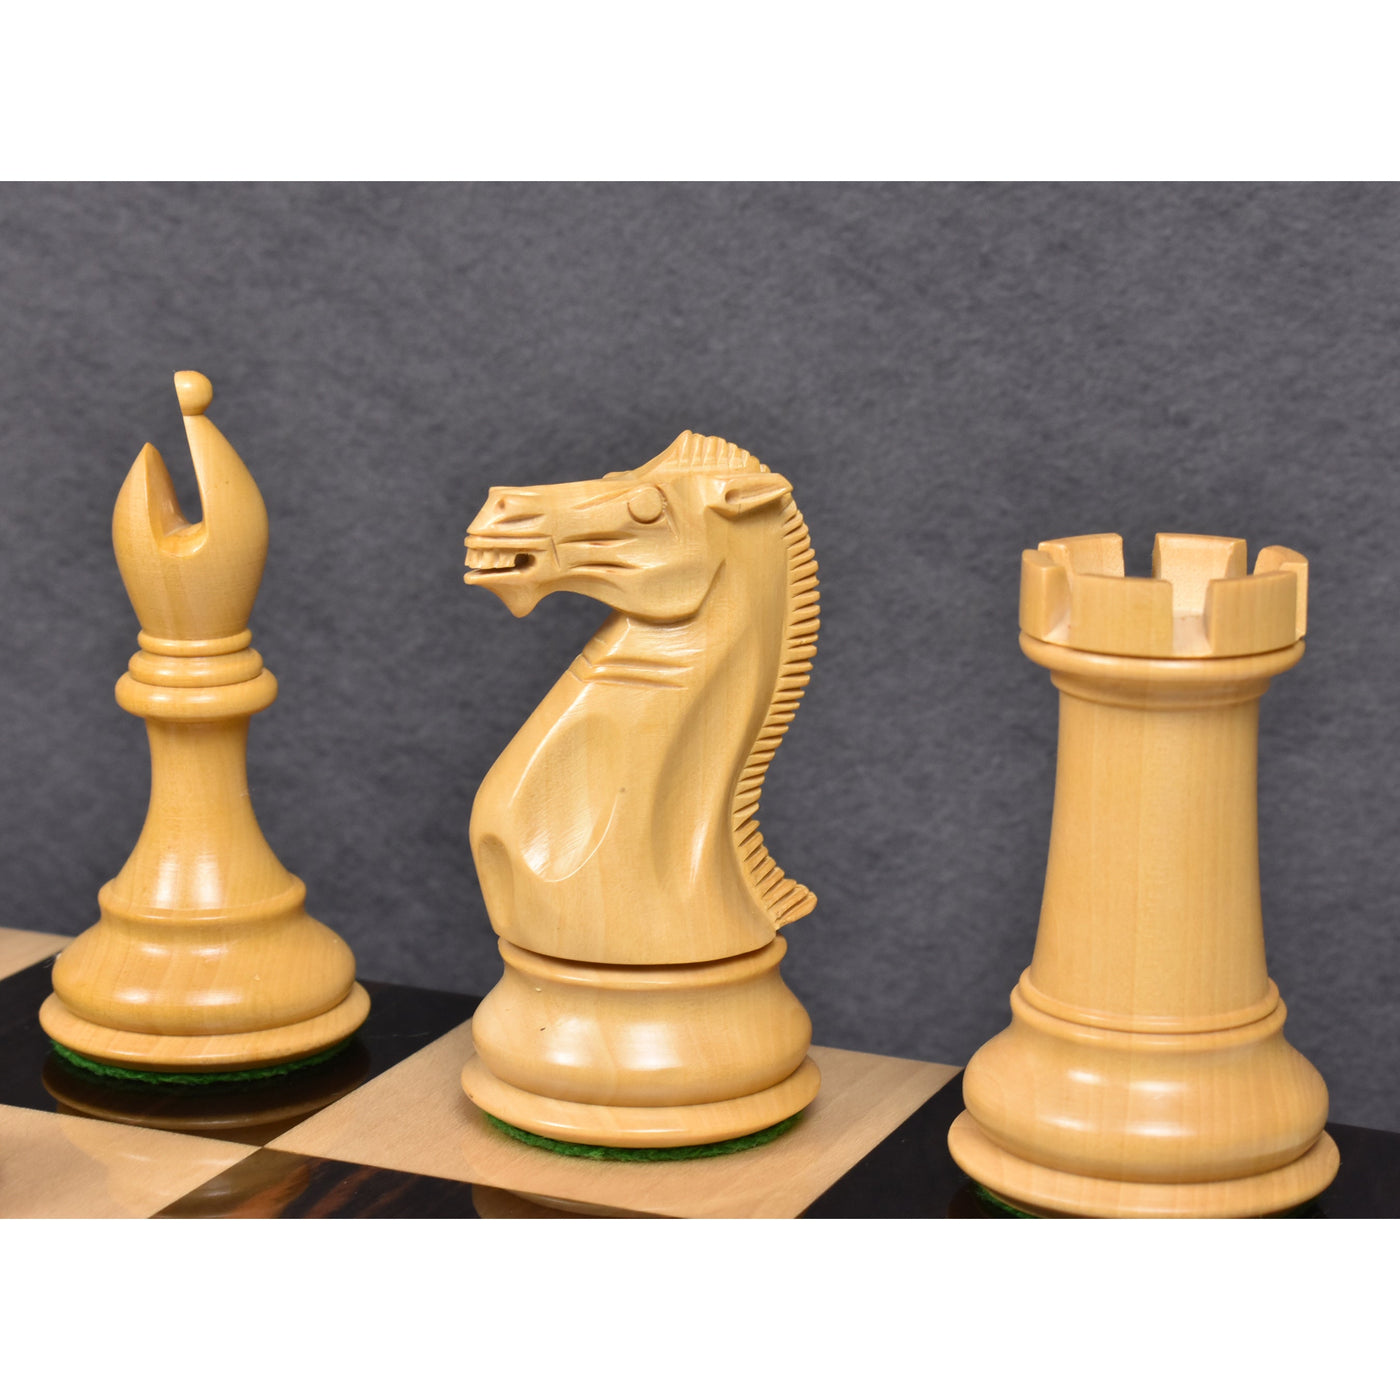 Slightly Imperfect 4" Sleek Staunton Luxury Chess Set - Chess Pieces Only - Triple Weighted Ebony Wood